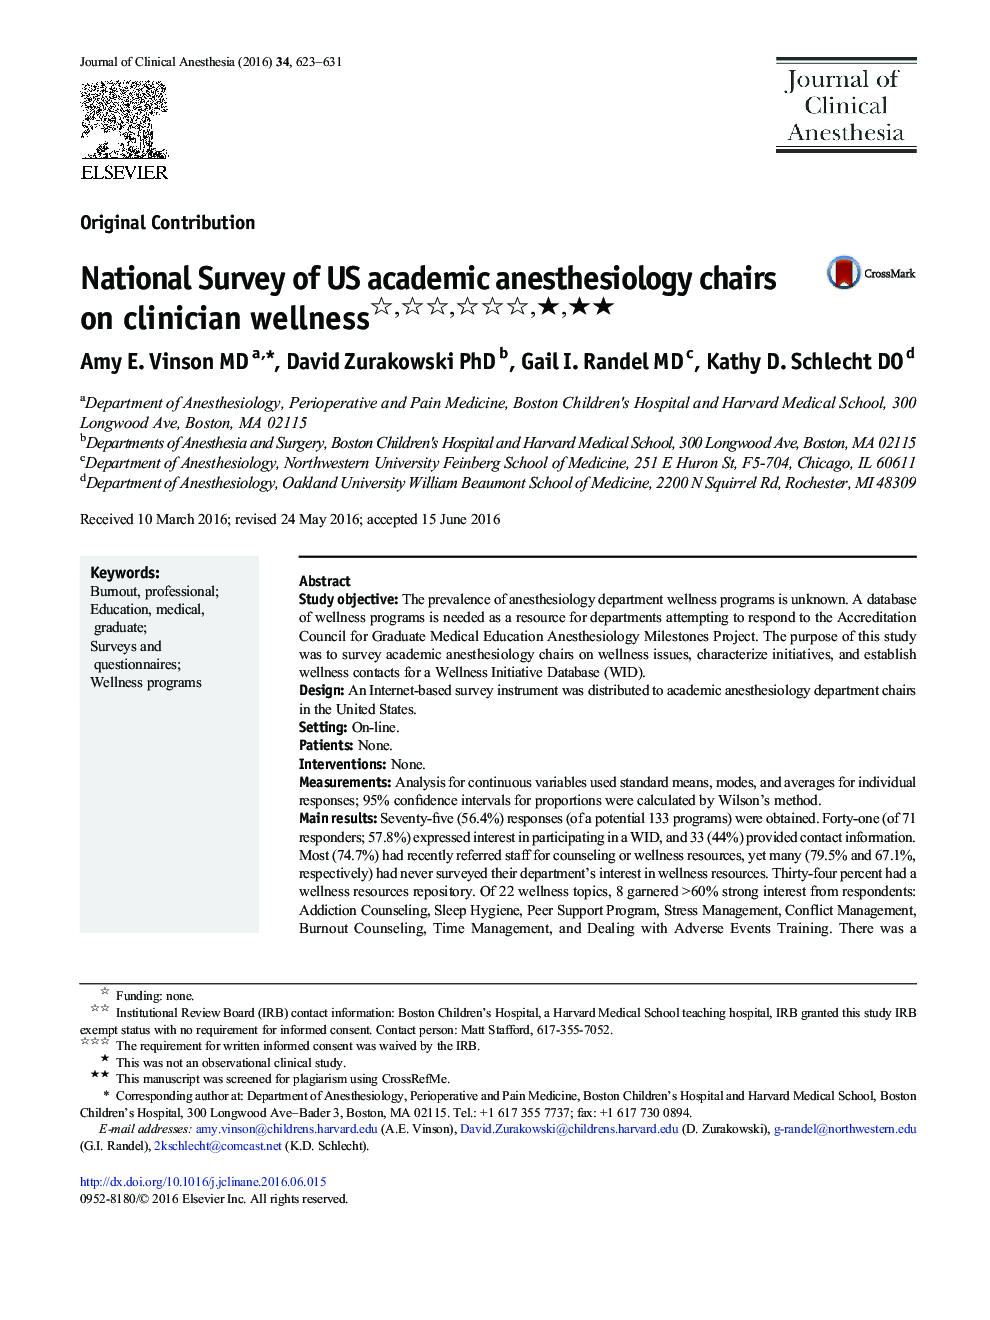 National Survey of US academic anesthesiology chairs on clinician wellnessâââ